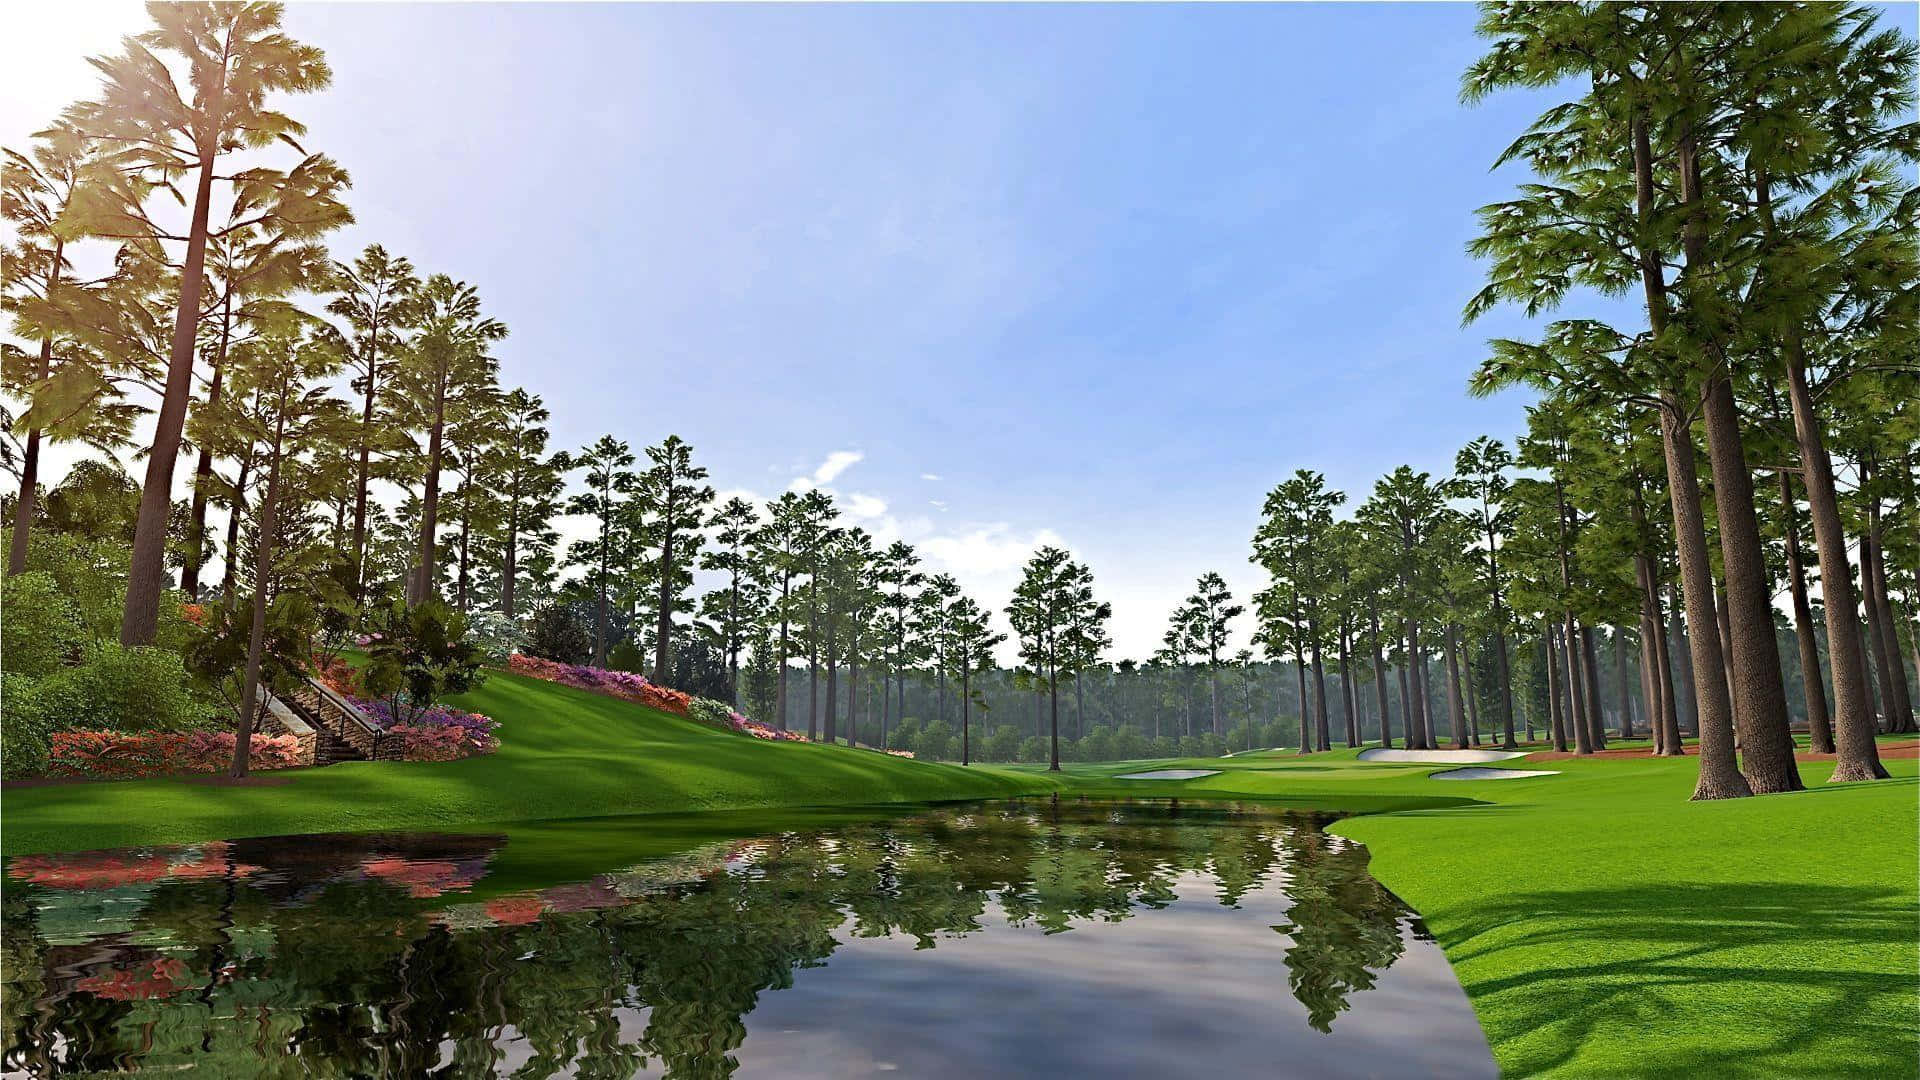 "Feast your eyes on the beauty of Augusta National Golf Club!" Wallpaper